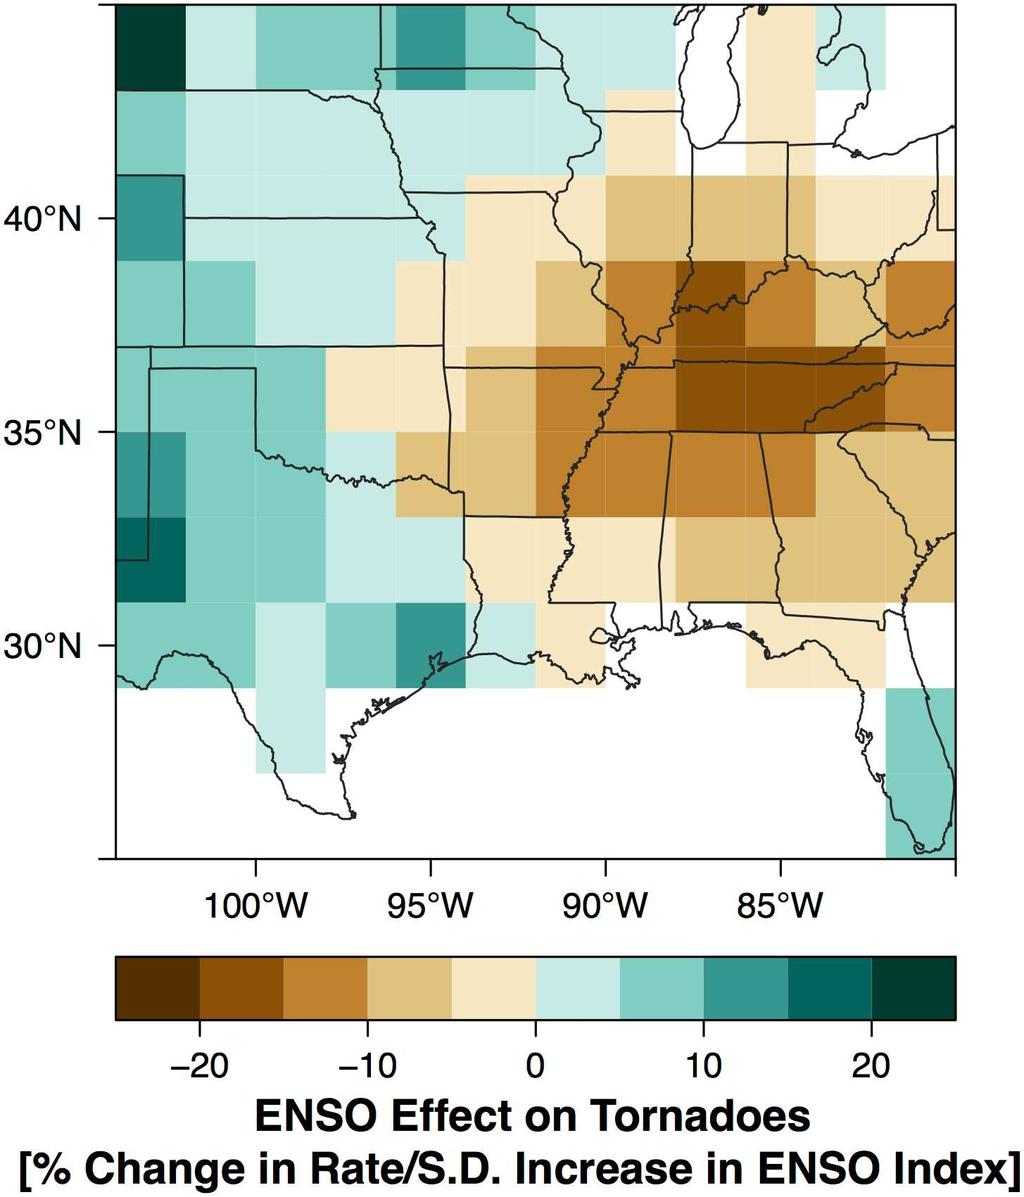 Fig 11. Short-term view. ENSO effect on tornadoes. Magnitude of the effect in units of percentage change in tornado rate per standard deviation (s.d.) increase in the springtime (Mar May) value of the bi-variate ENSO index.